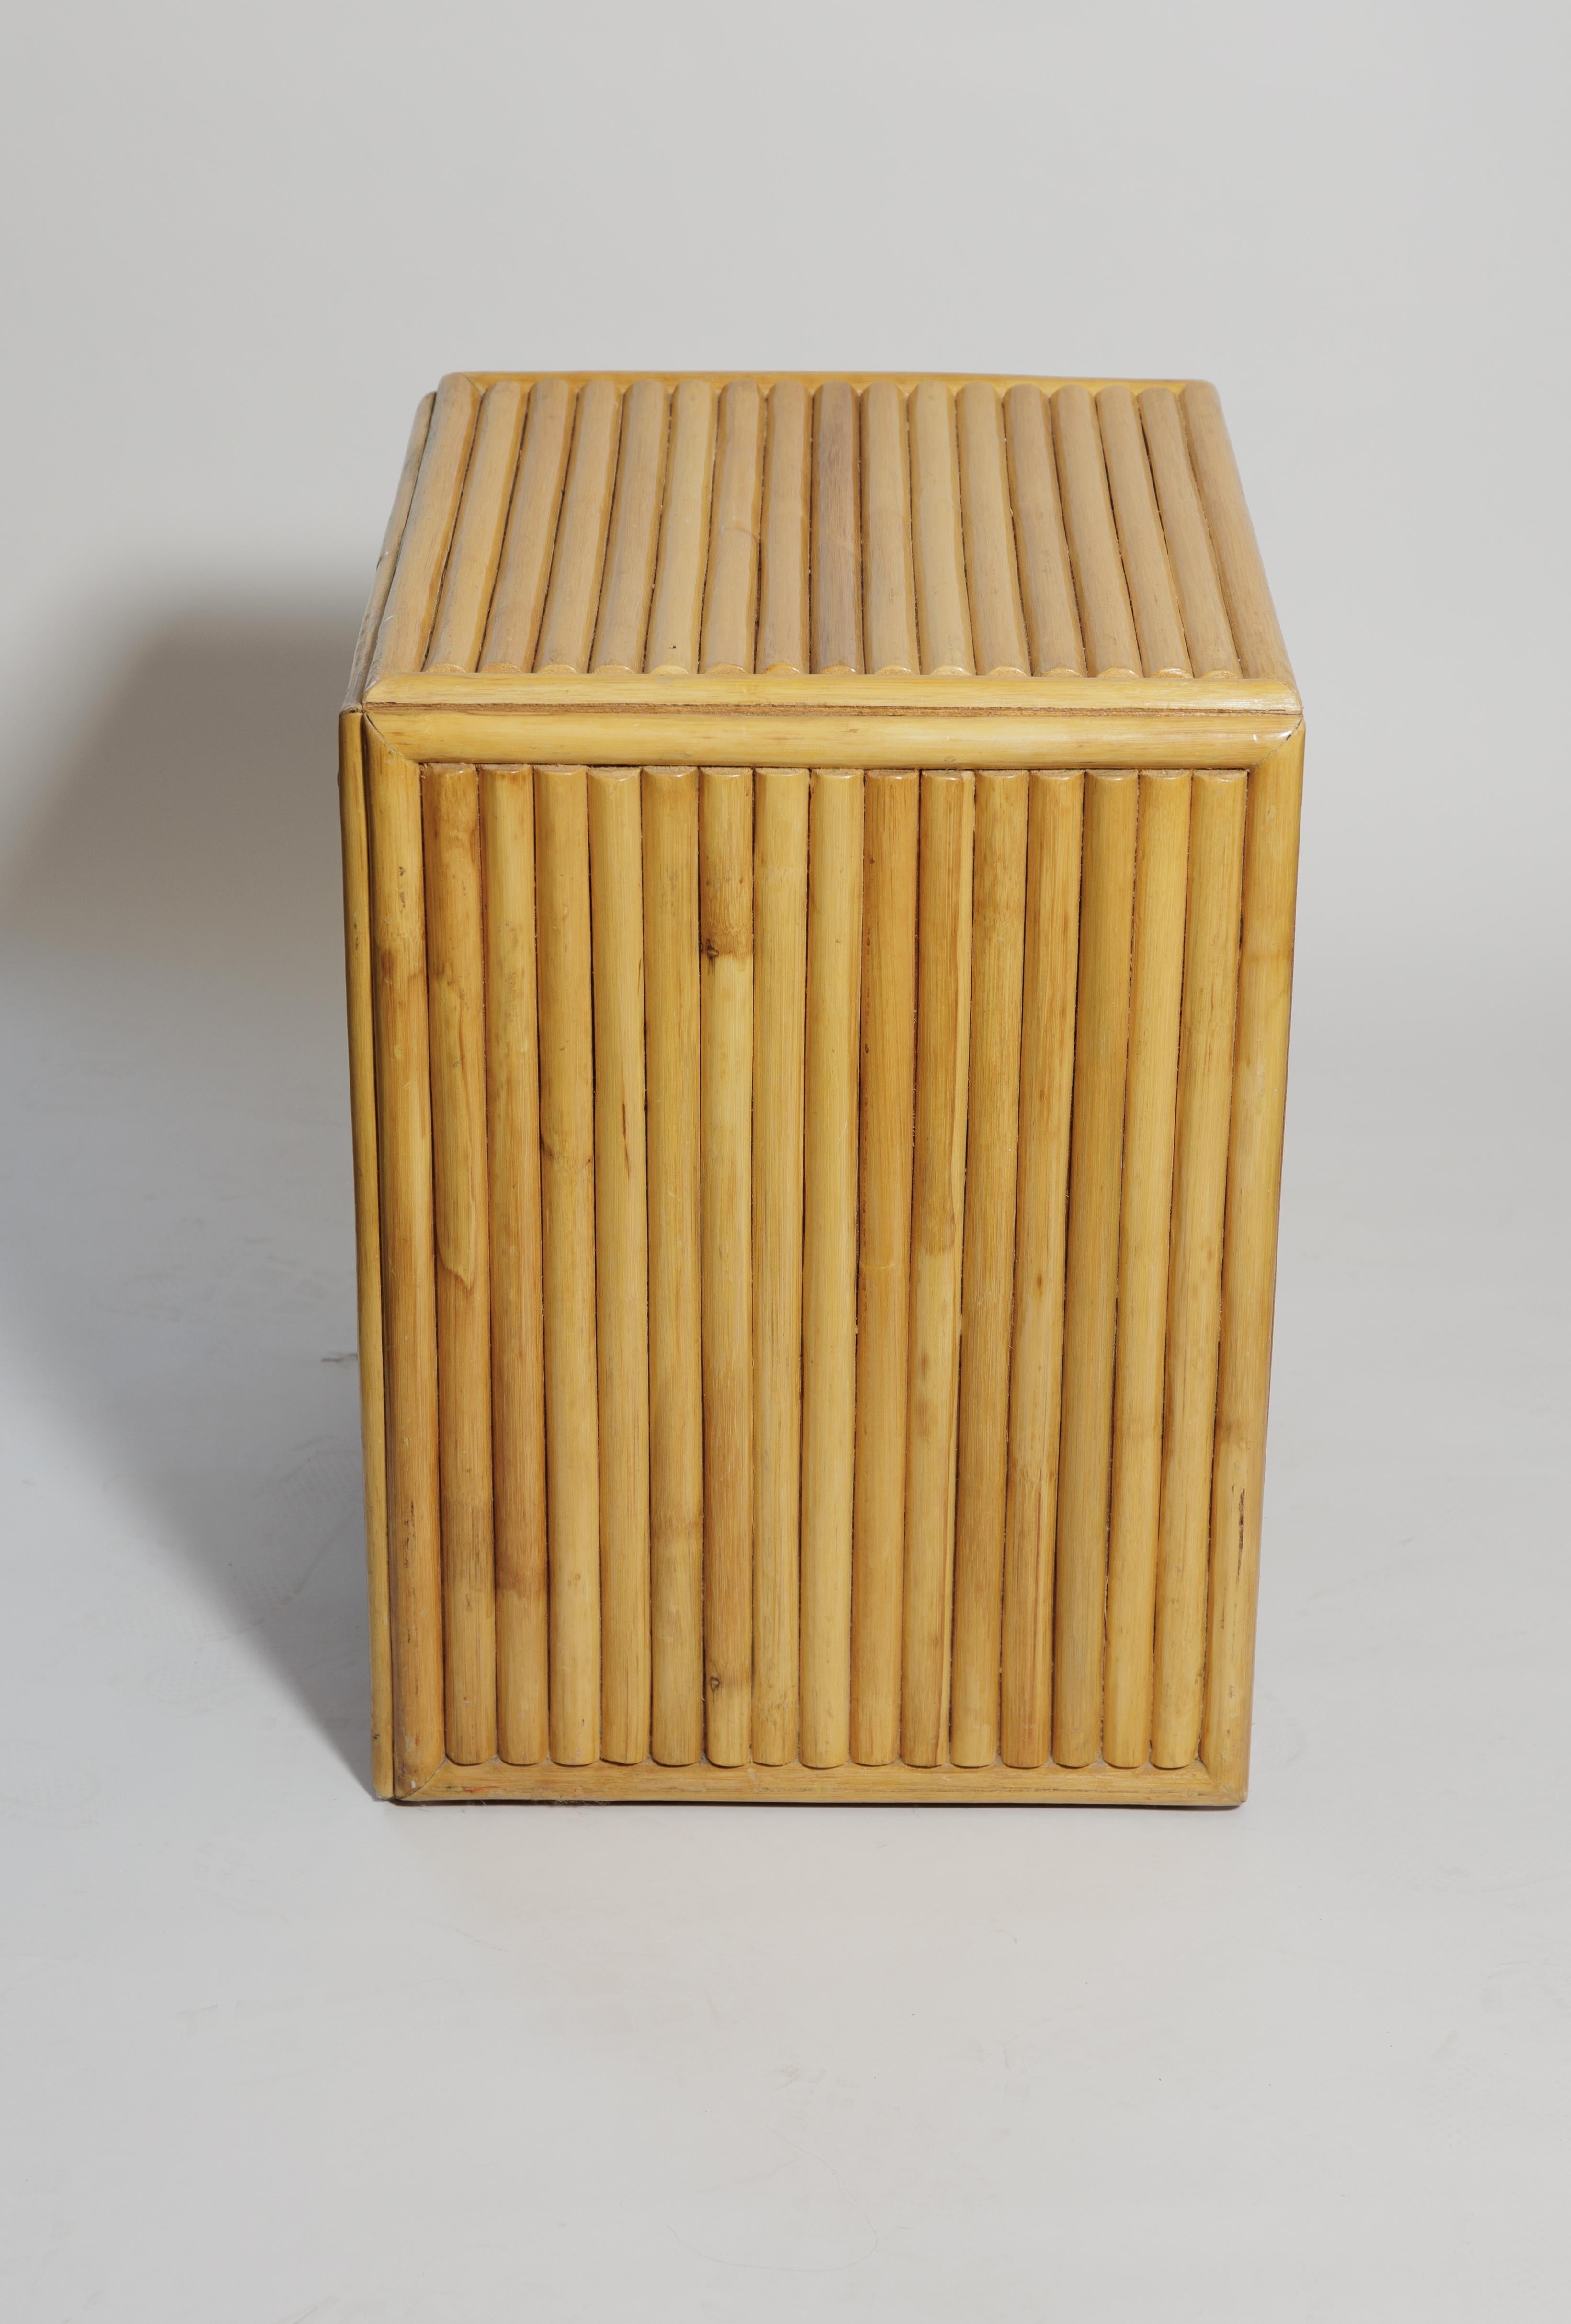 Pair of Bamboo Cabinets with Drawer and Doors In Good Condition For Sale In Bridgehampton, NY